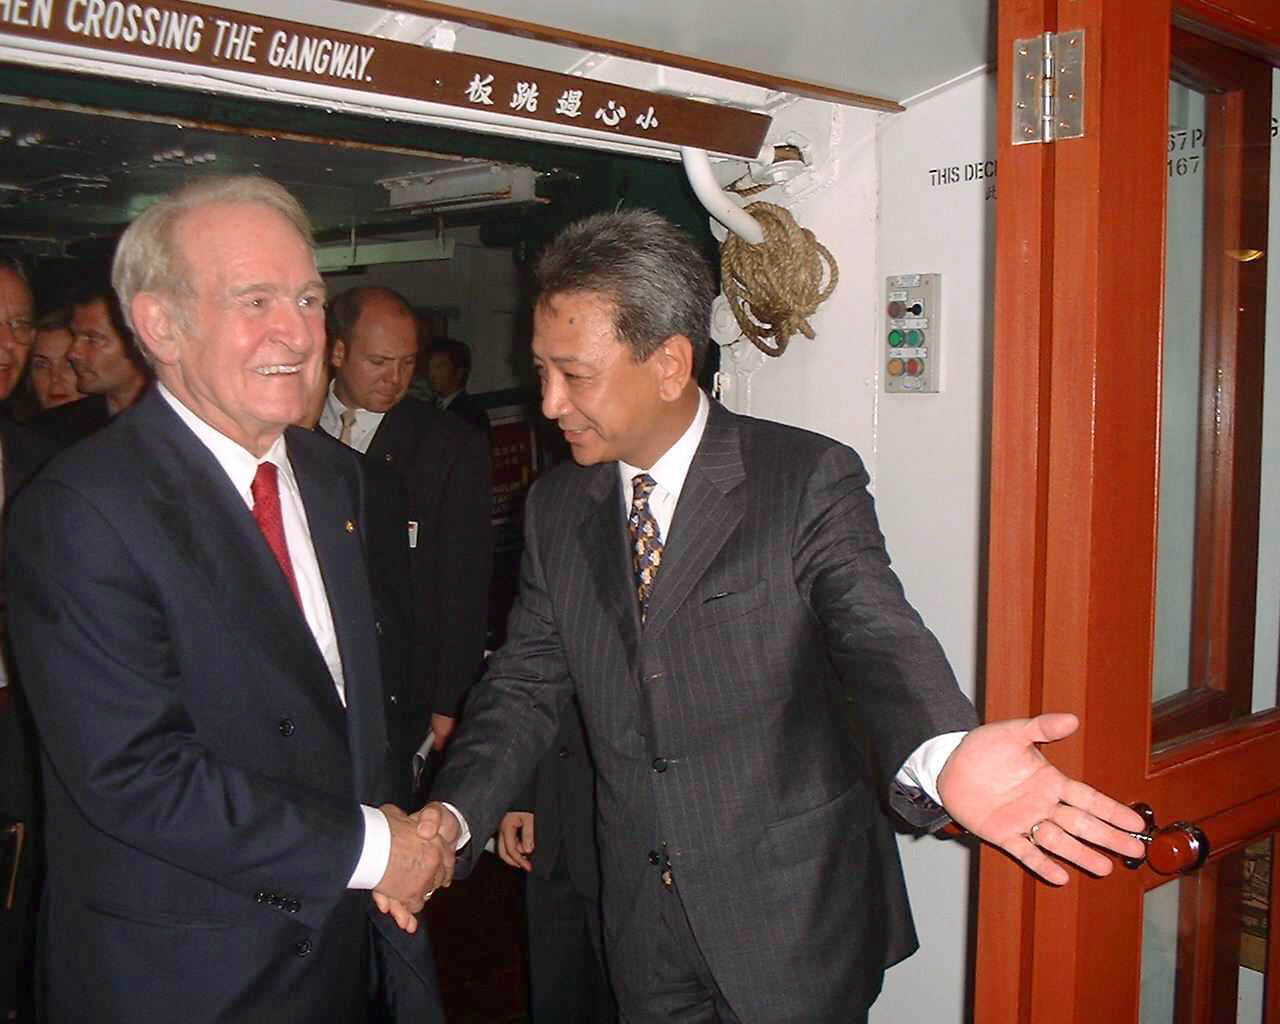 Mr. Johannes Rau (the 8th President of the Federal Republic of Germany) visited in September 2003